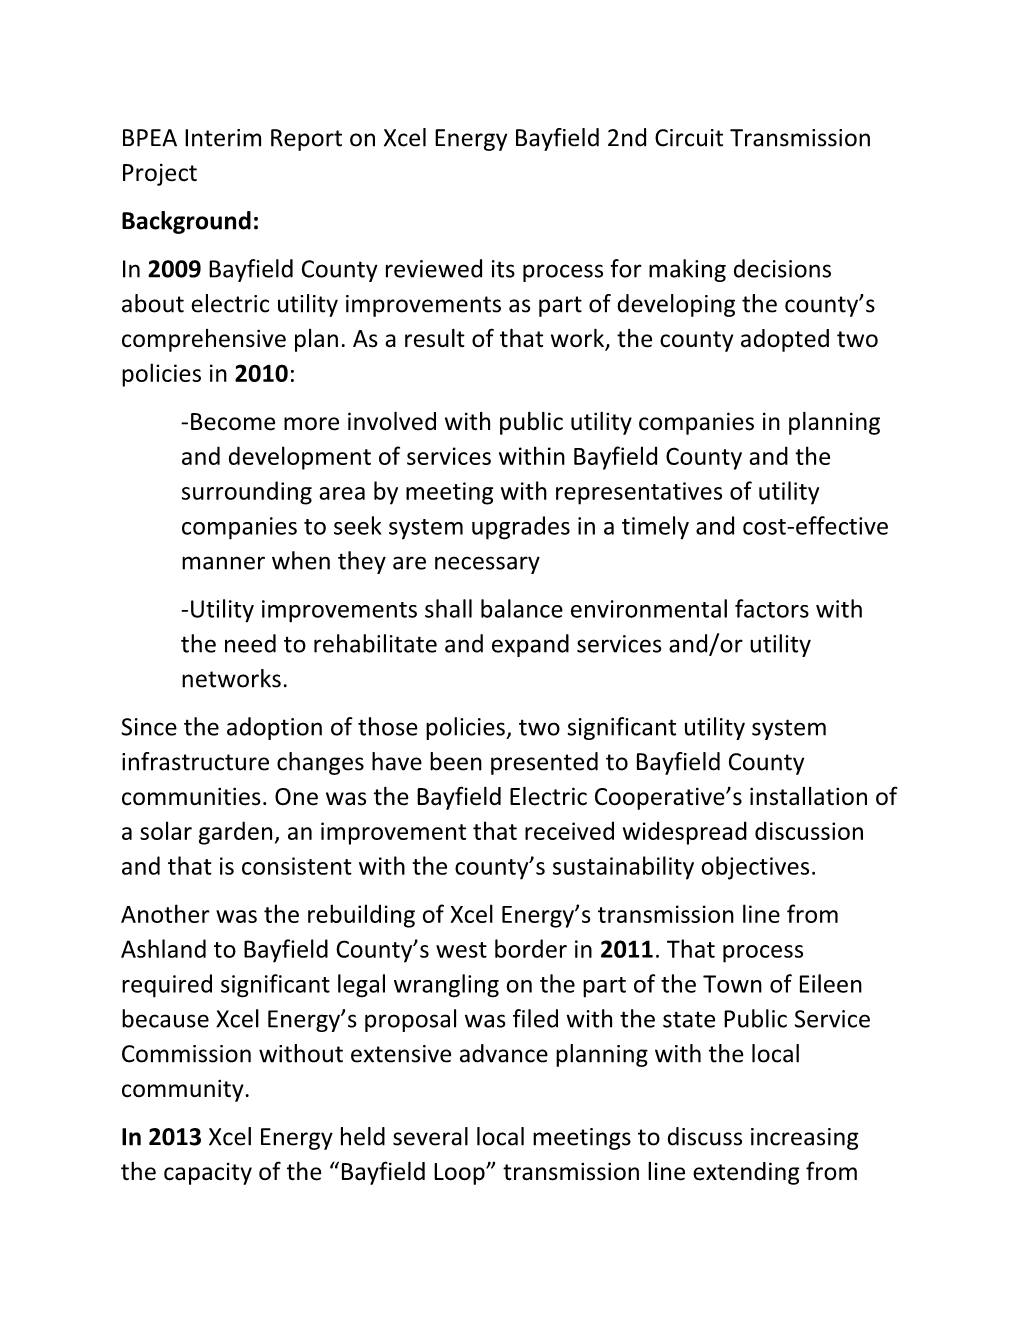 BPEA Interim Report on Xcel Energy Bayfield 2Nd Circuit Transmission Project